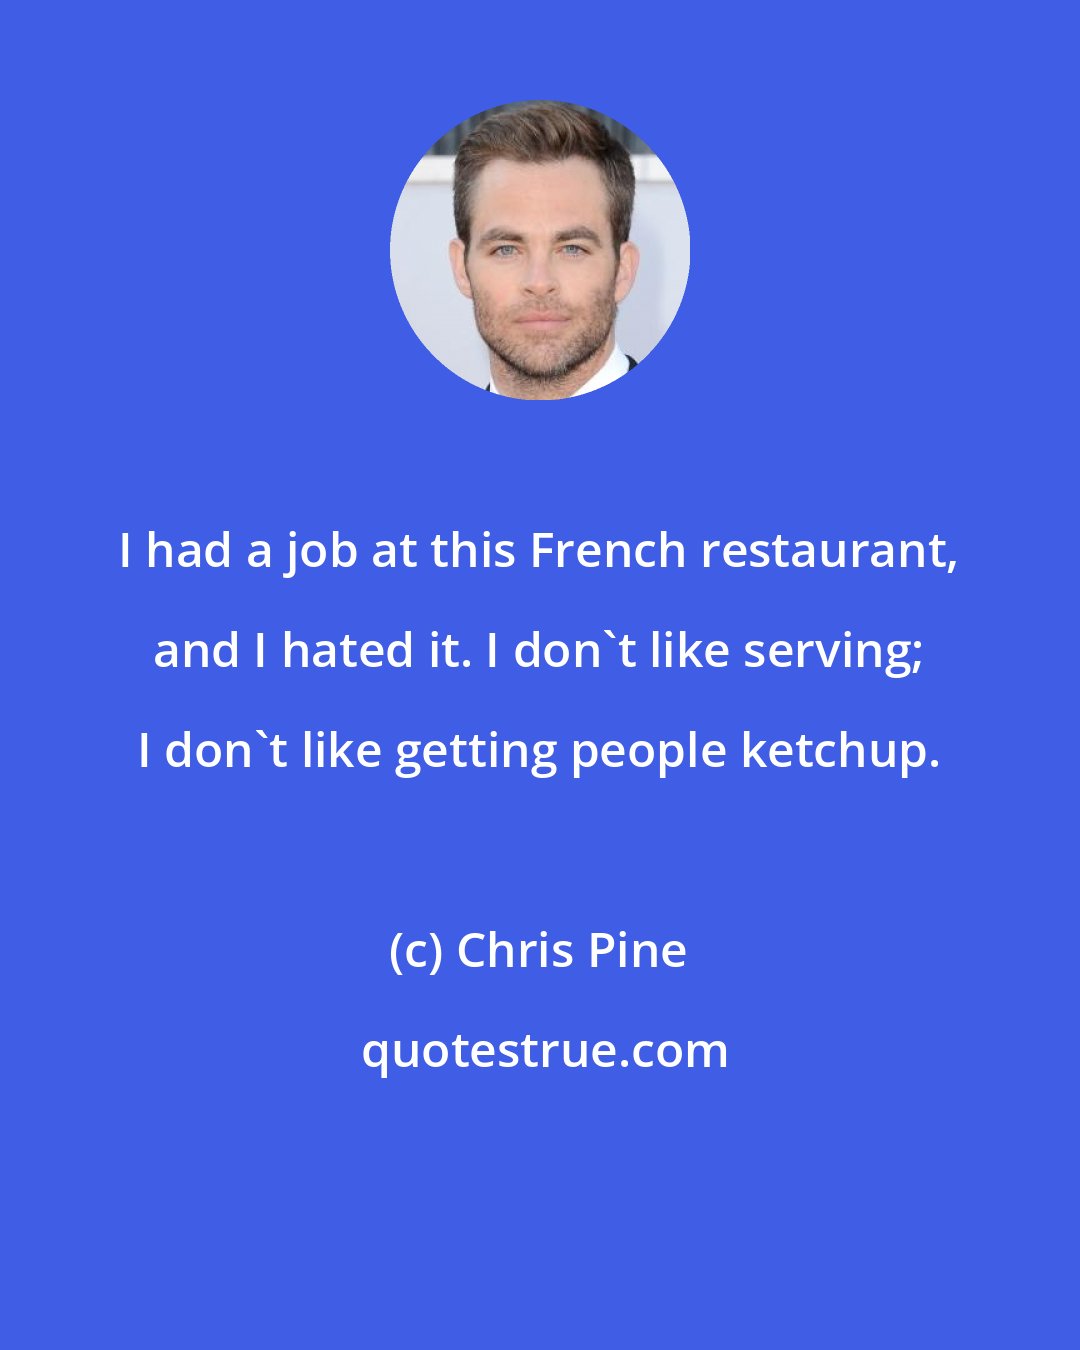 Chris Pine: I had a job at this French restaurant, and I hated it. I don't like serving; I don't like getting people ketchup.